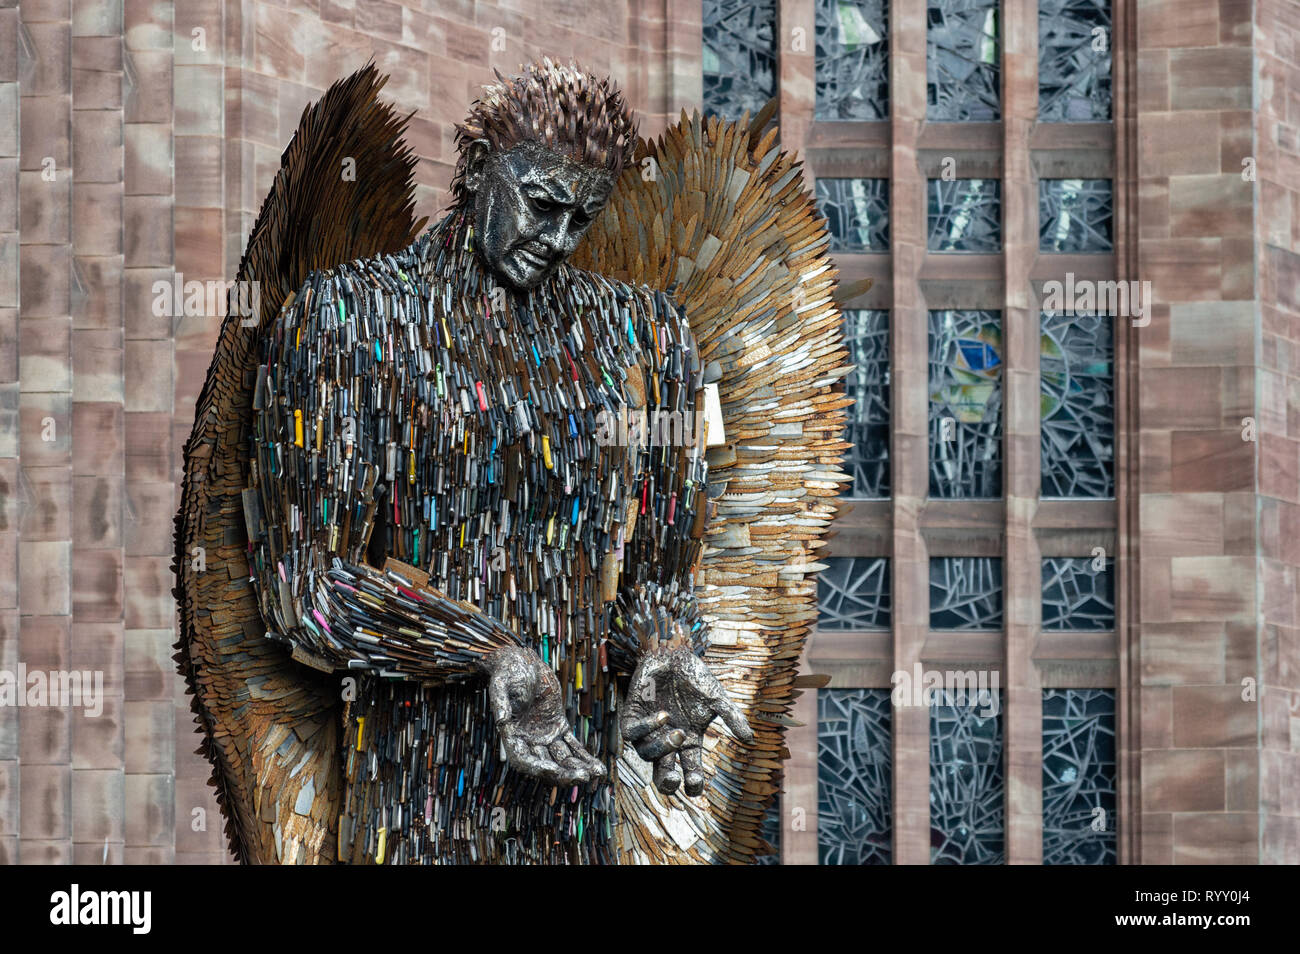 Coventry, West Midlands, UK, 15 March 2019. The Knife Angel sculpture arrived at Coventry Cathedral. Stock Photo